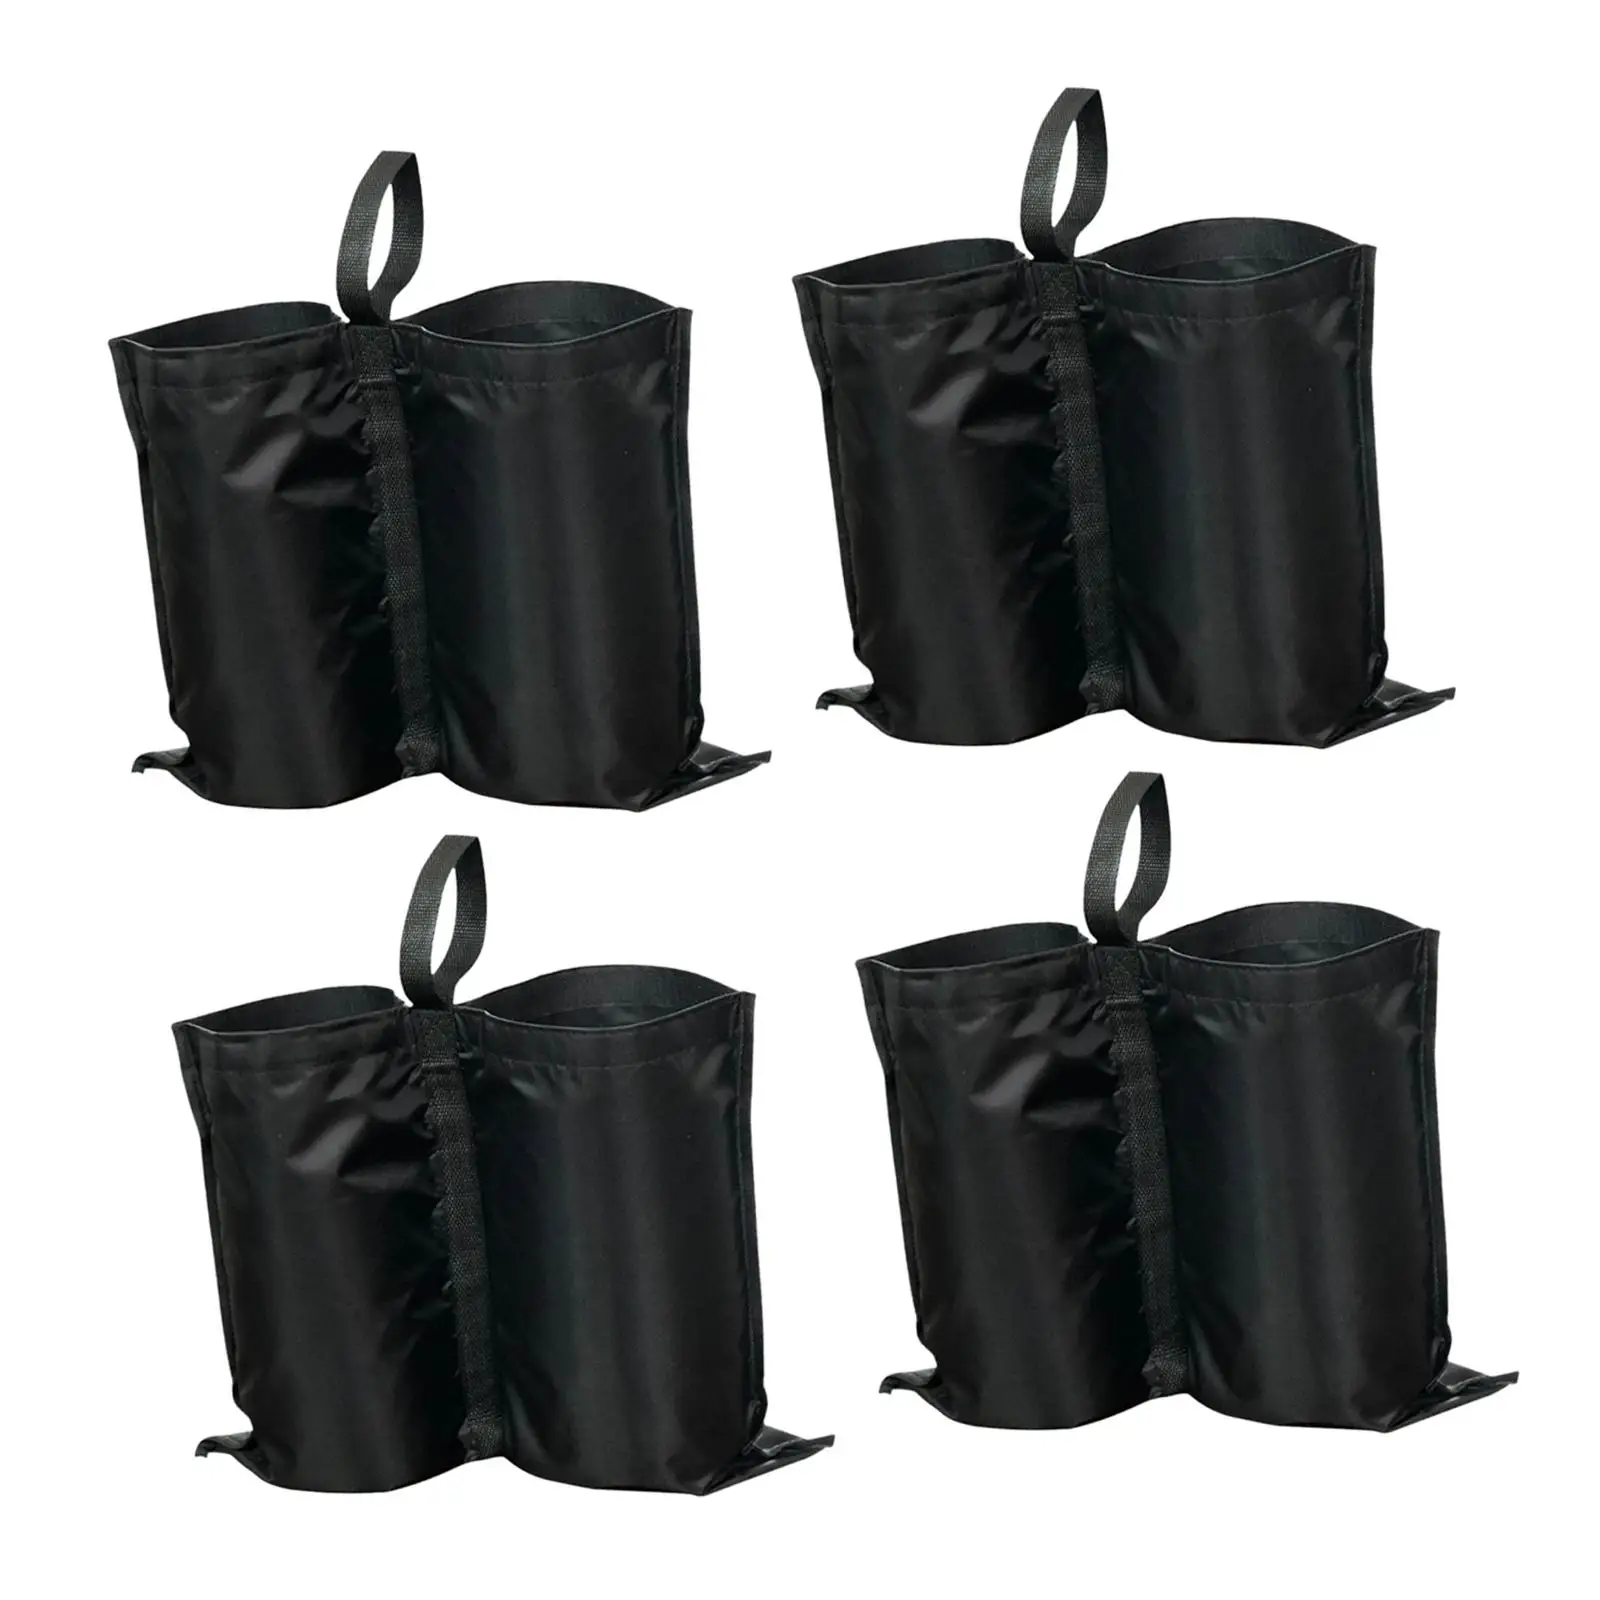 4x Leg Canopy Weights Sand Bags Heavy Duty Canopy Weight Bags for Instant Outdoor Shelter Canopy Canopy Tent Patio Umbrella